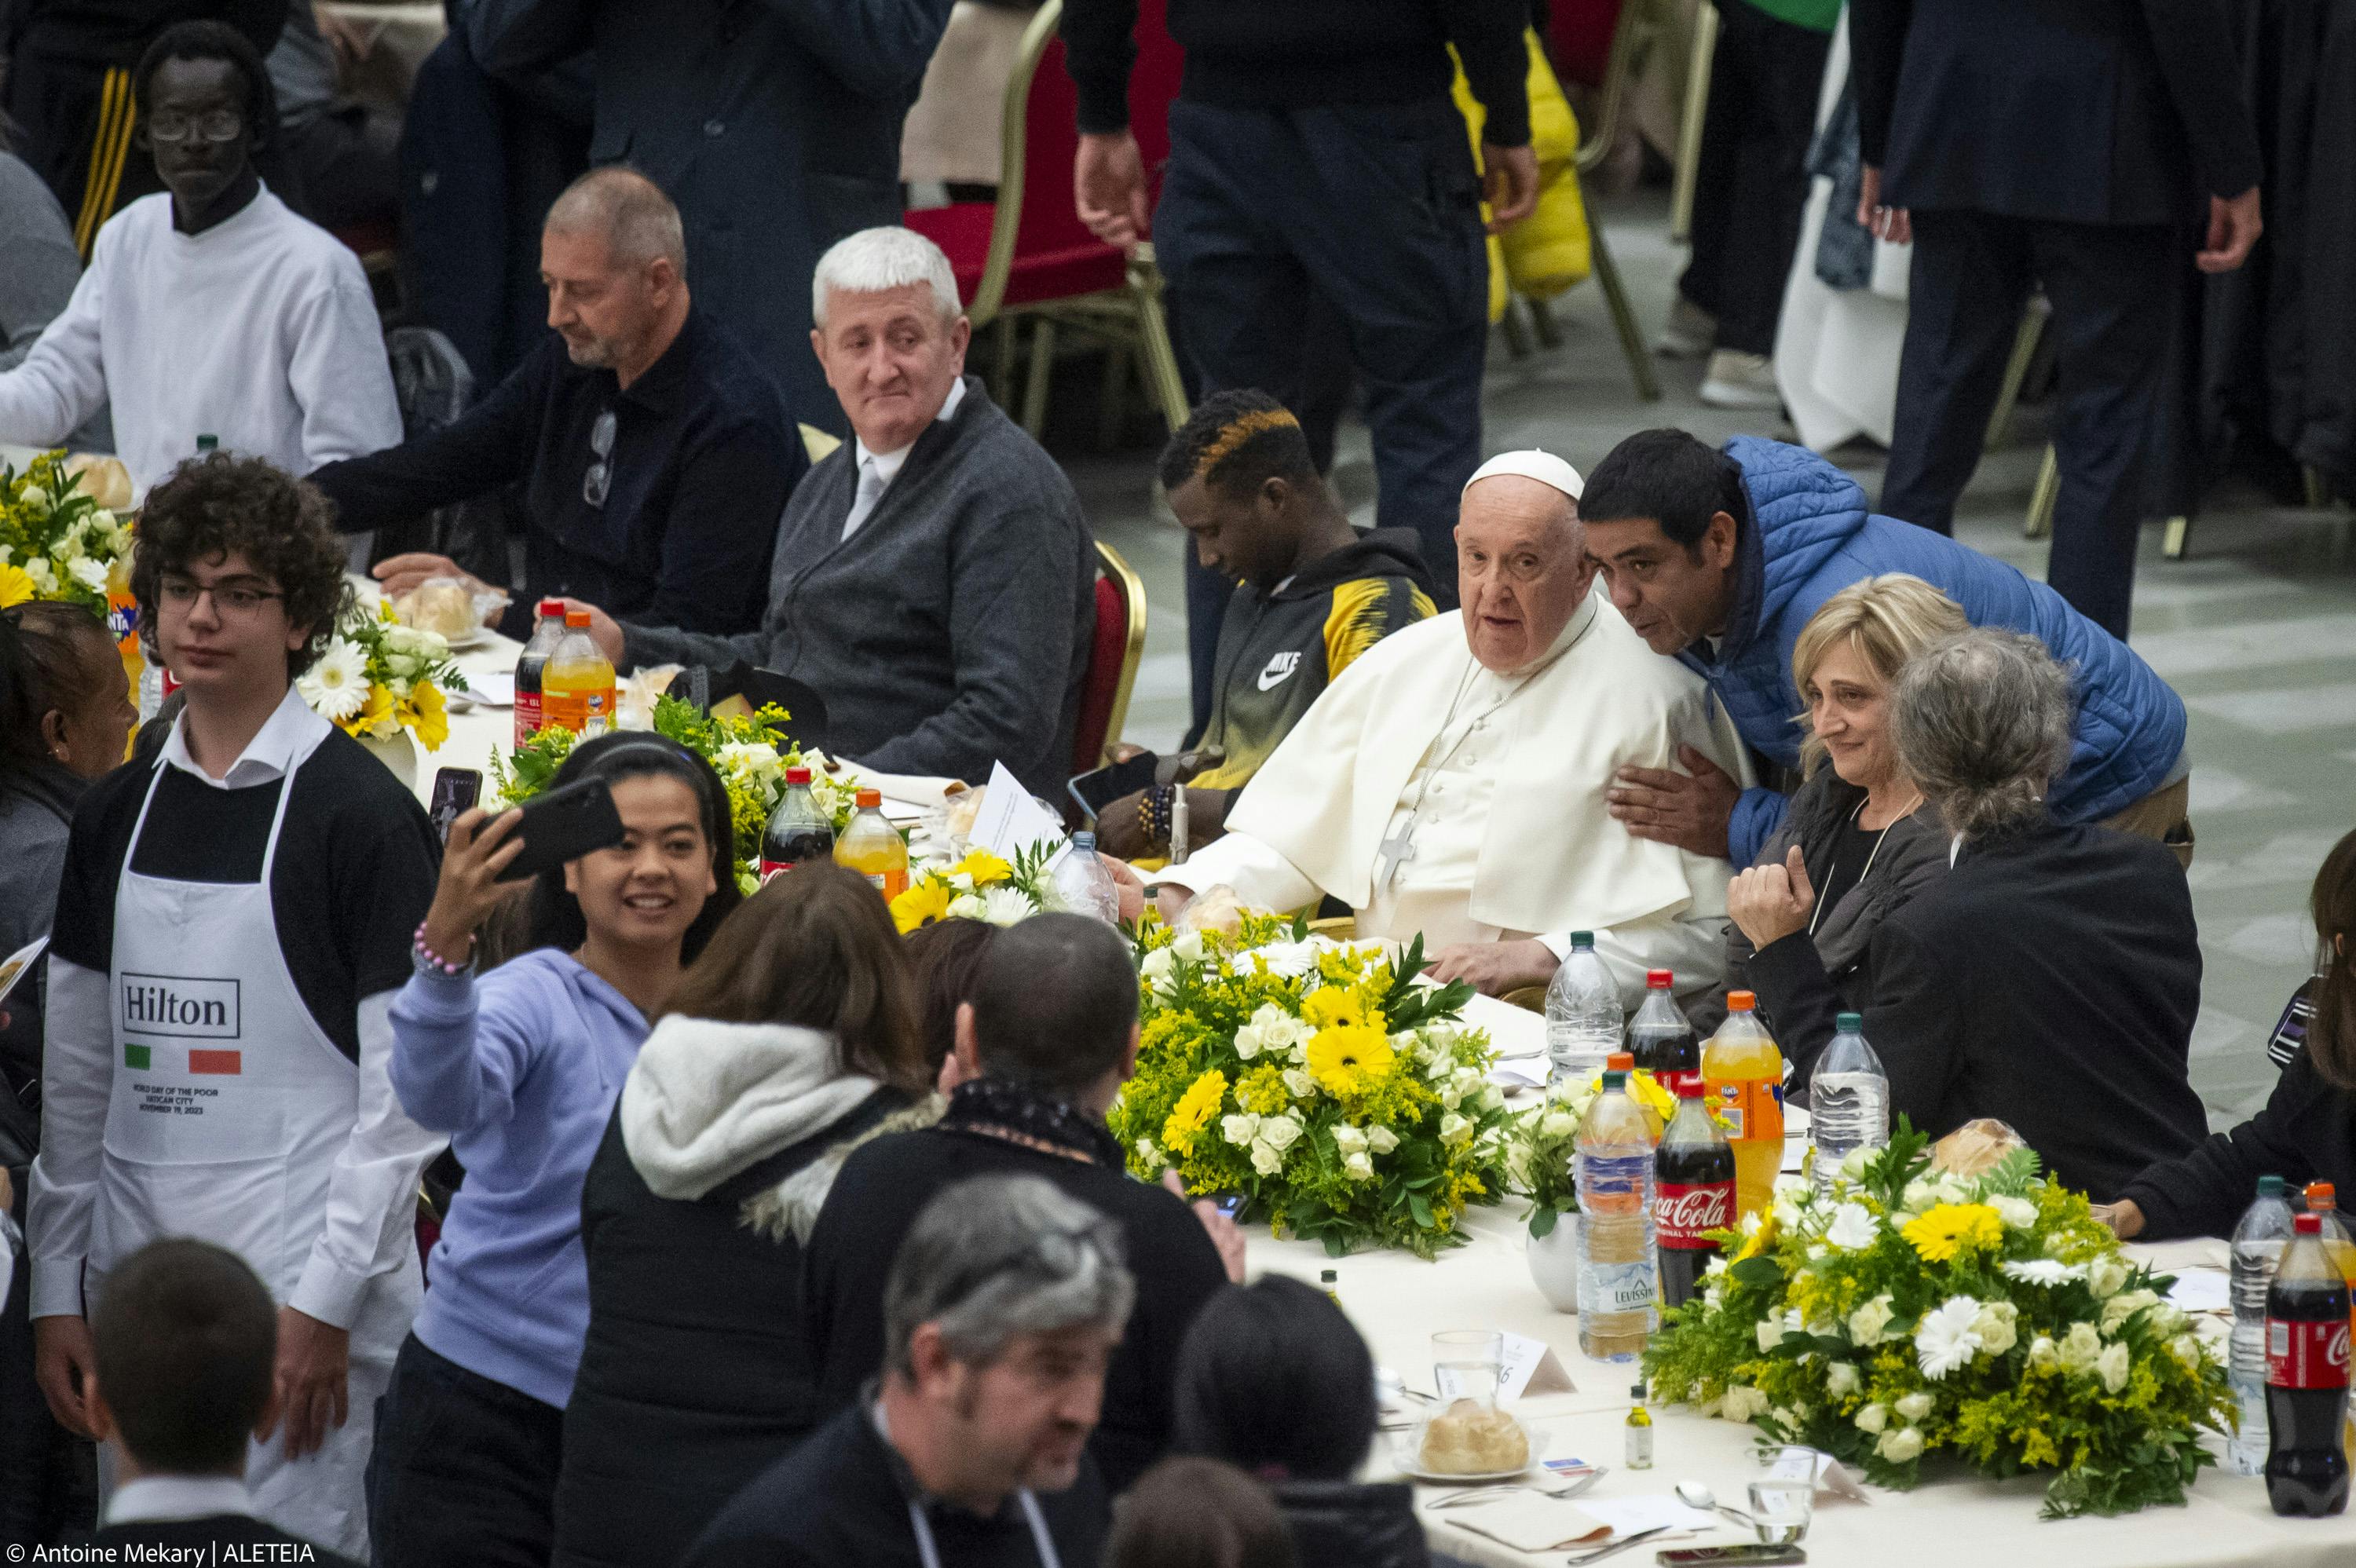 Pope enjoys lunch with those struggling economically (Photo gallery)